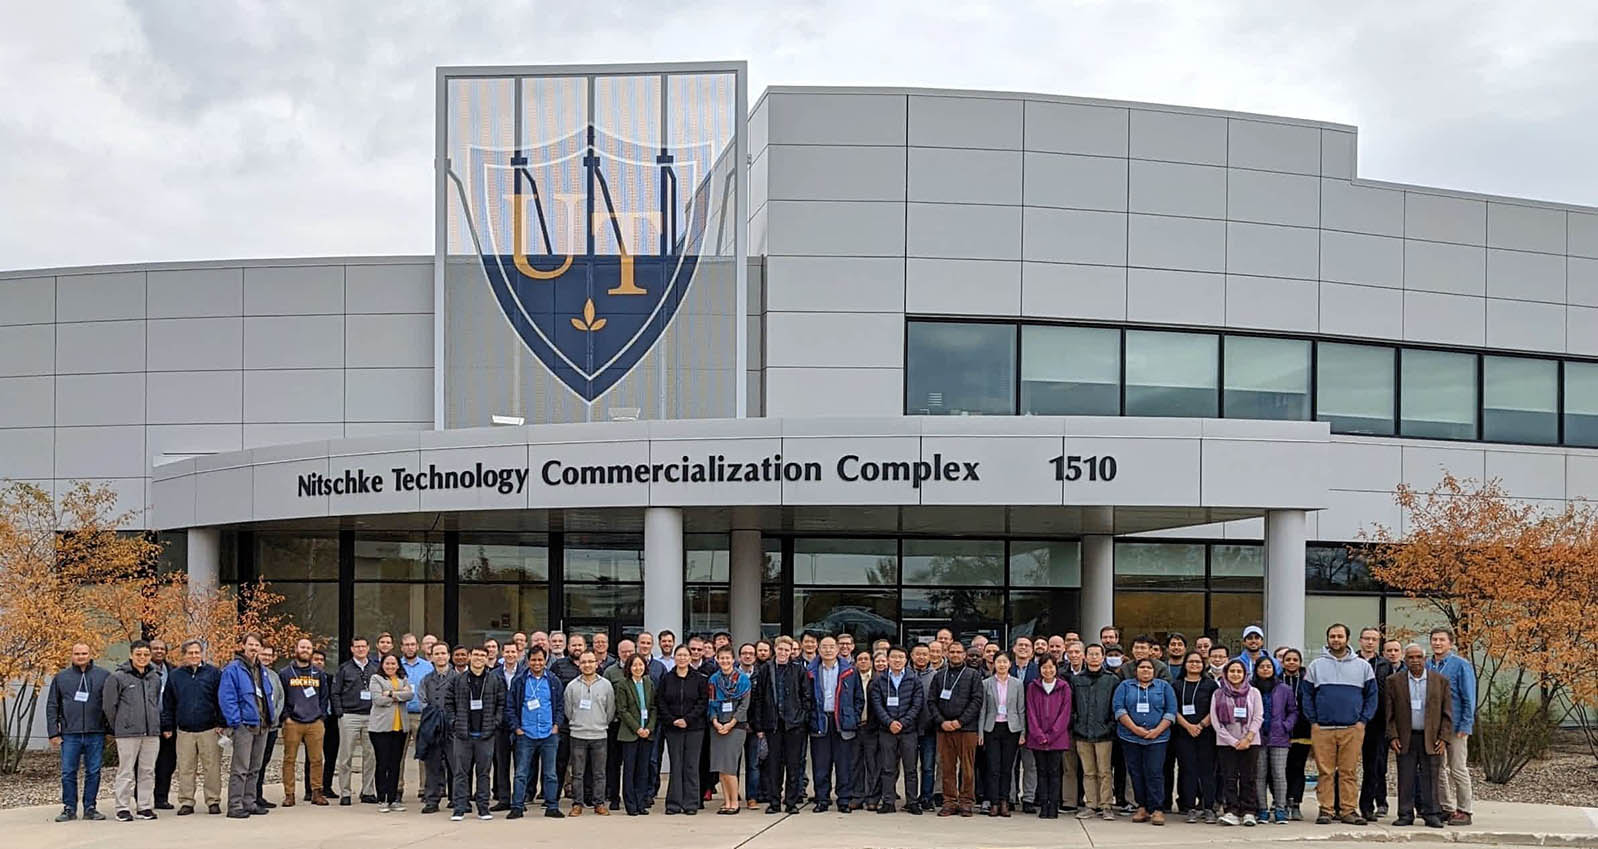 PVIC research group photo in front of Nitschke Technology Commercialization Copmlex